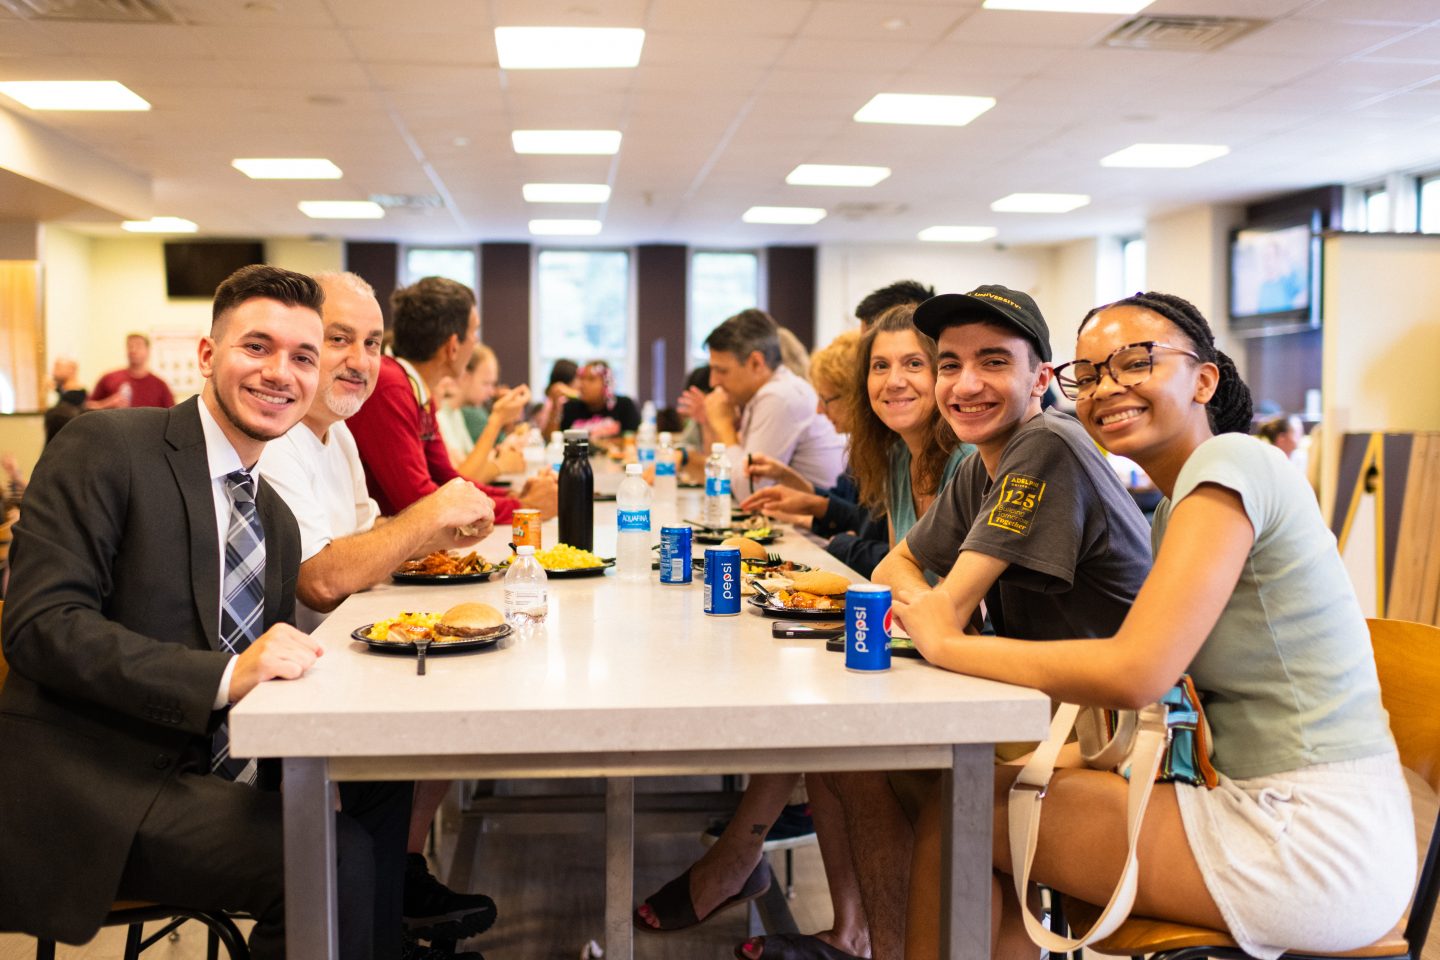 Group of six people smiling and seated at a table with food during a welcome BBQ at Adelphi University Orientation Weekend.